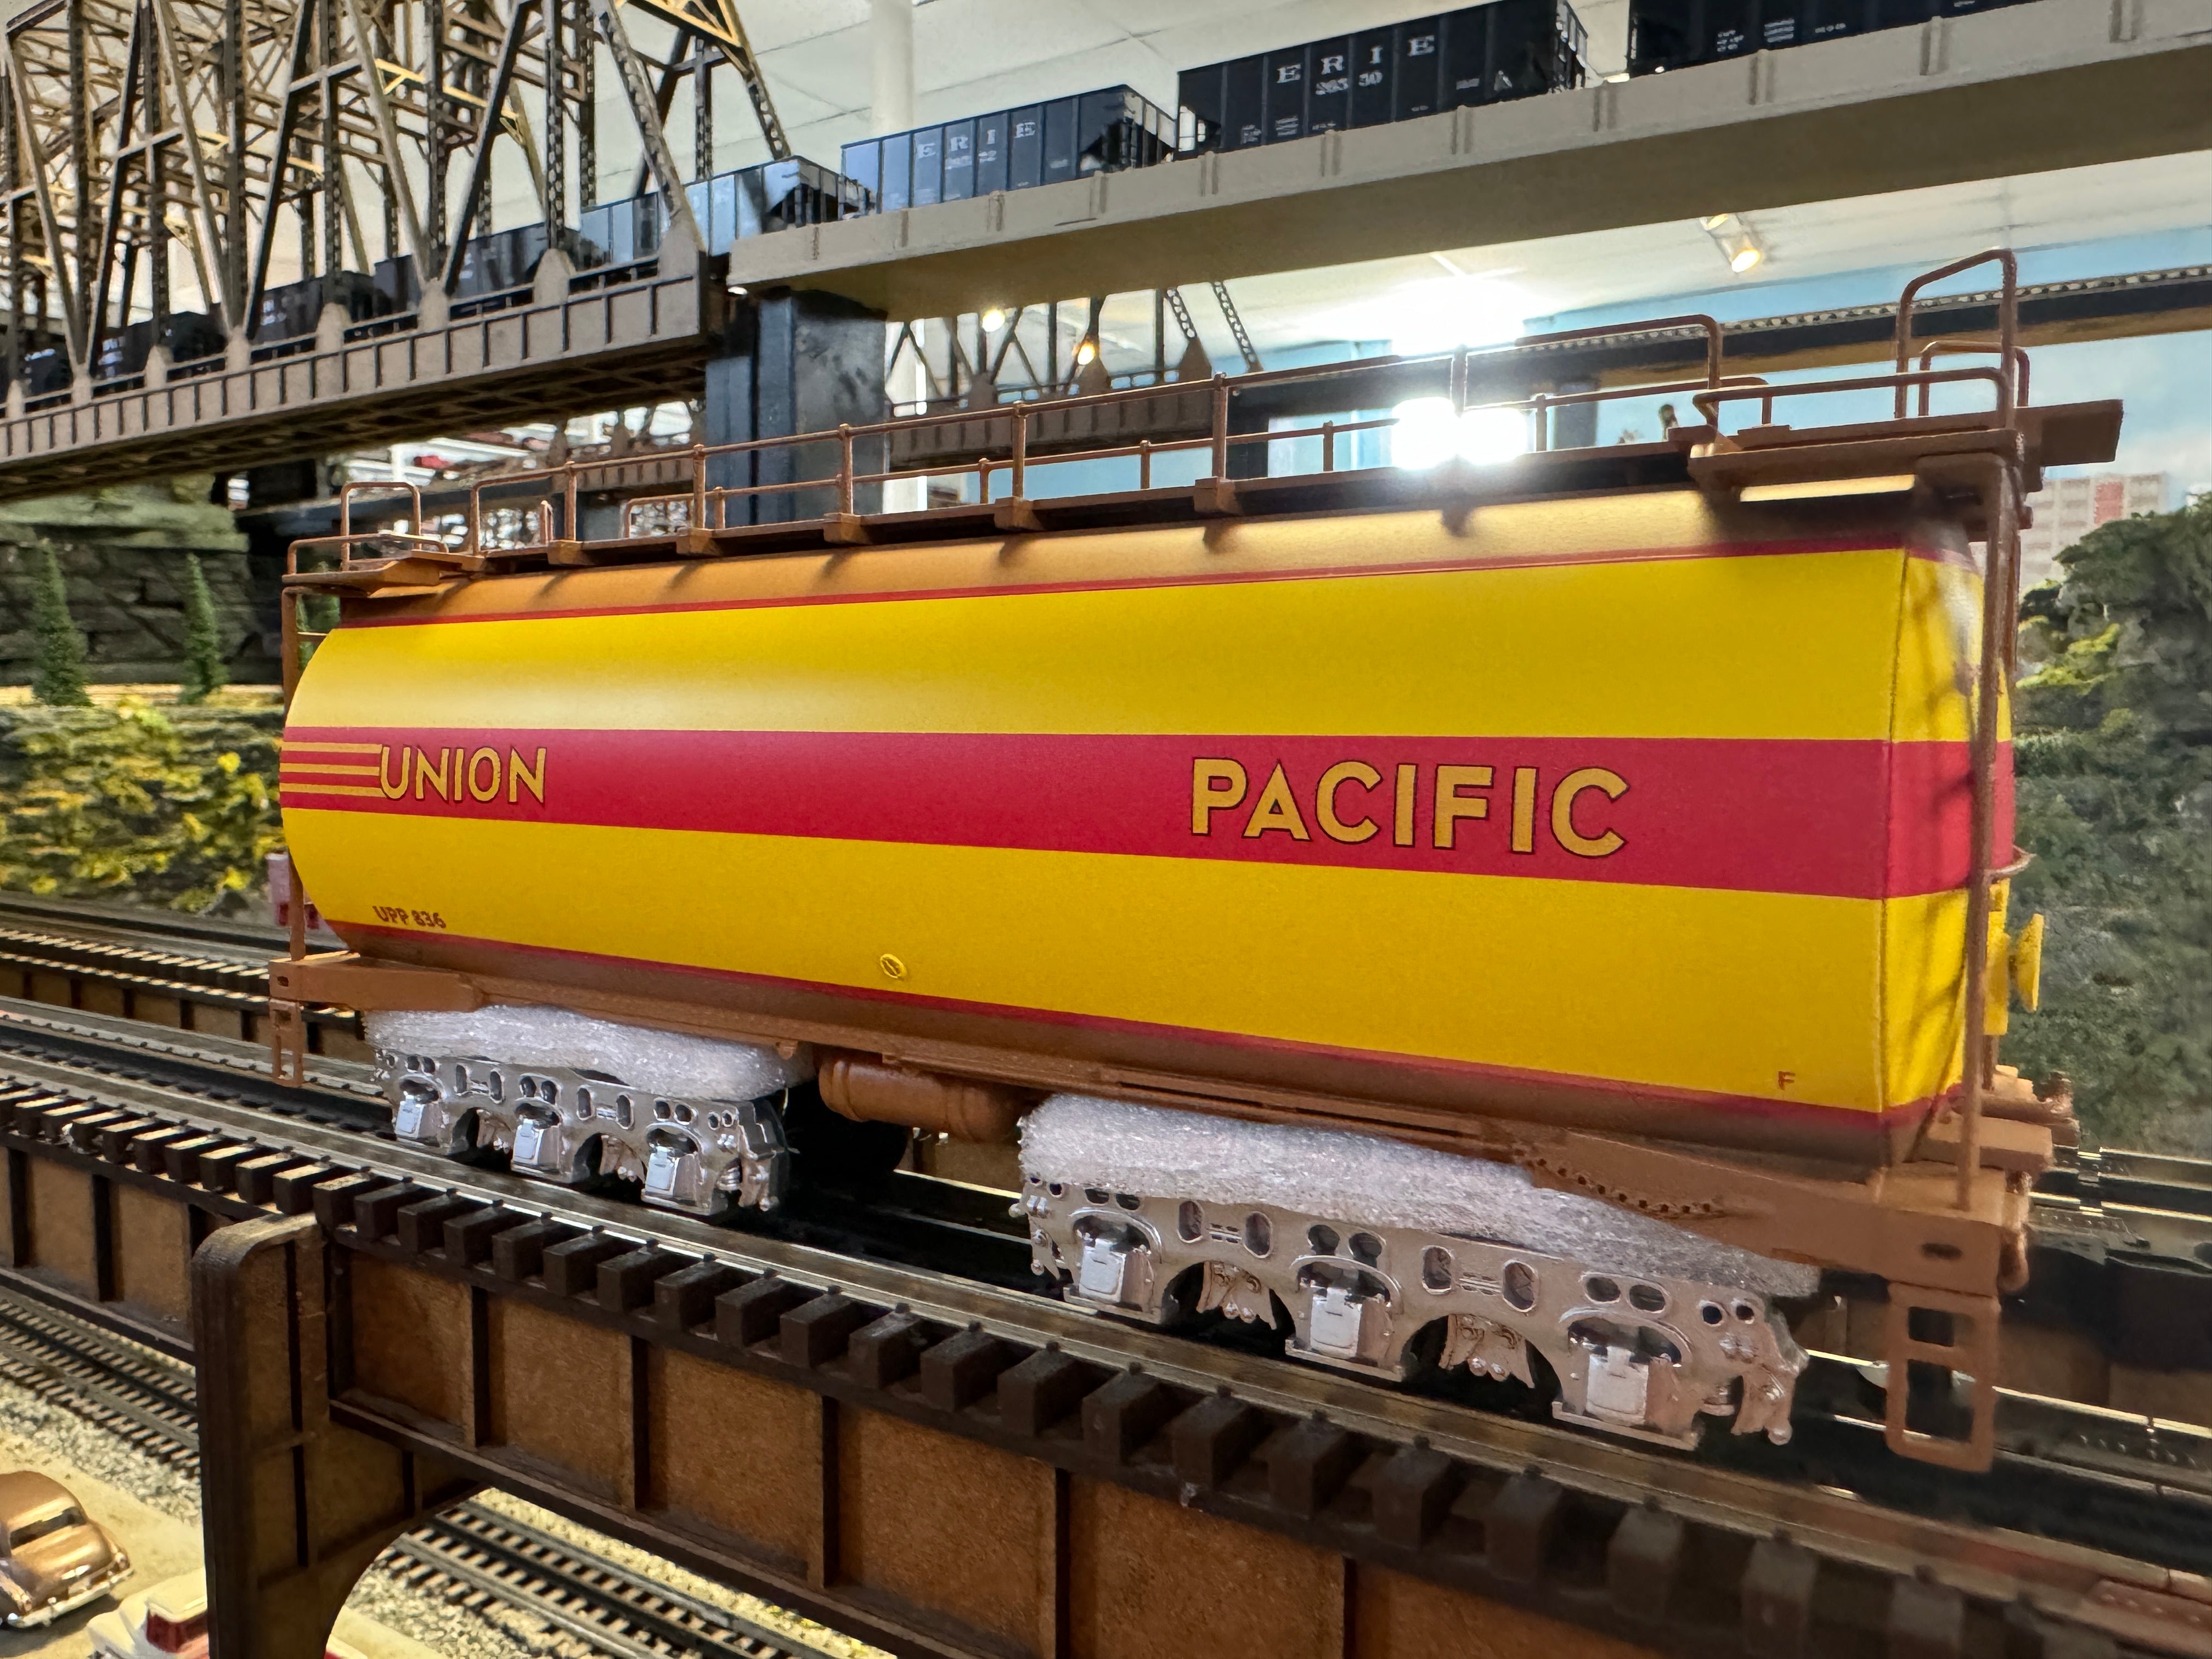 Lionel 2431790 - Auxiliary Tenders "Union Pacific" #836 (Challenger Scheme) - Custom Run for MrMuffin'sTrains